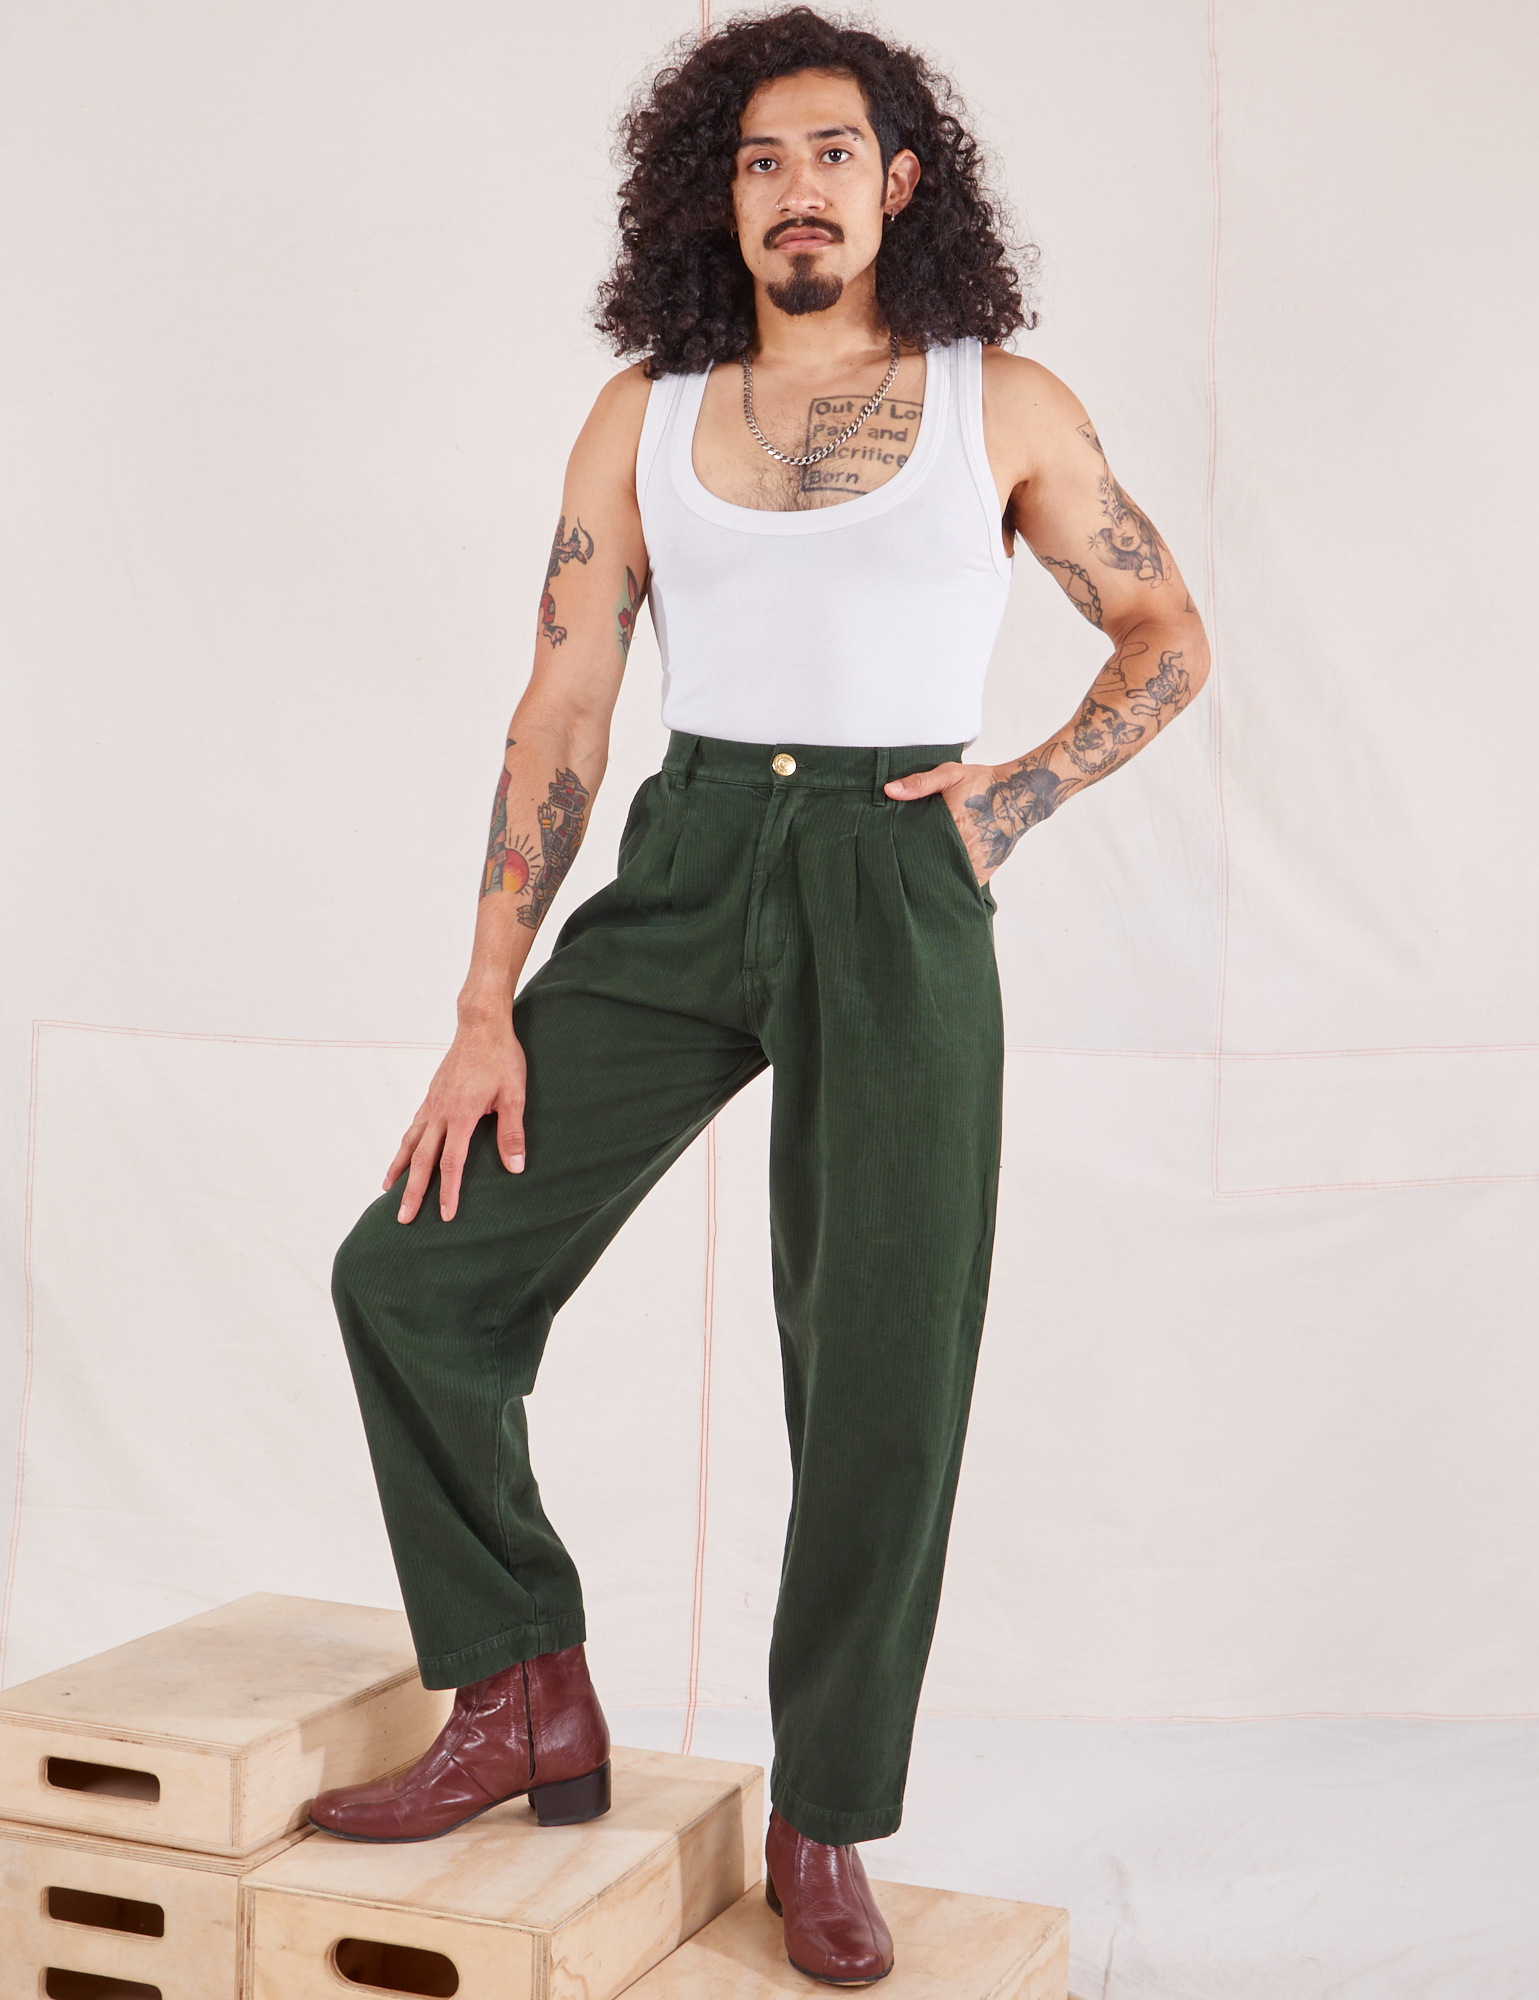 Jesse is 5&#39;8&quot; and wearing XS Heritage Trousers in Swamp Green paired with Cropped Tank Top in vintage off-white